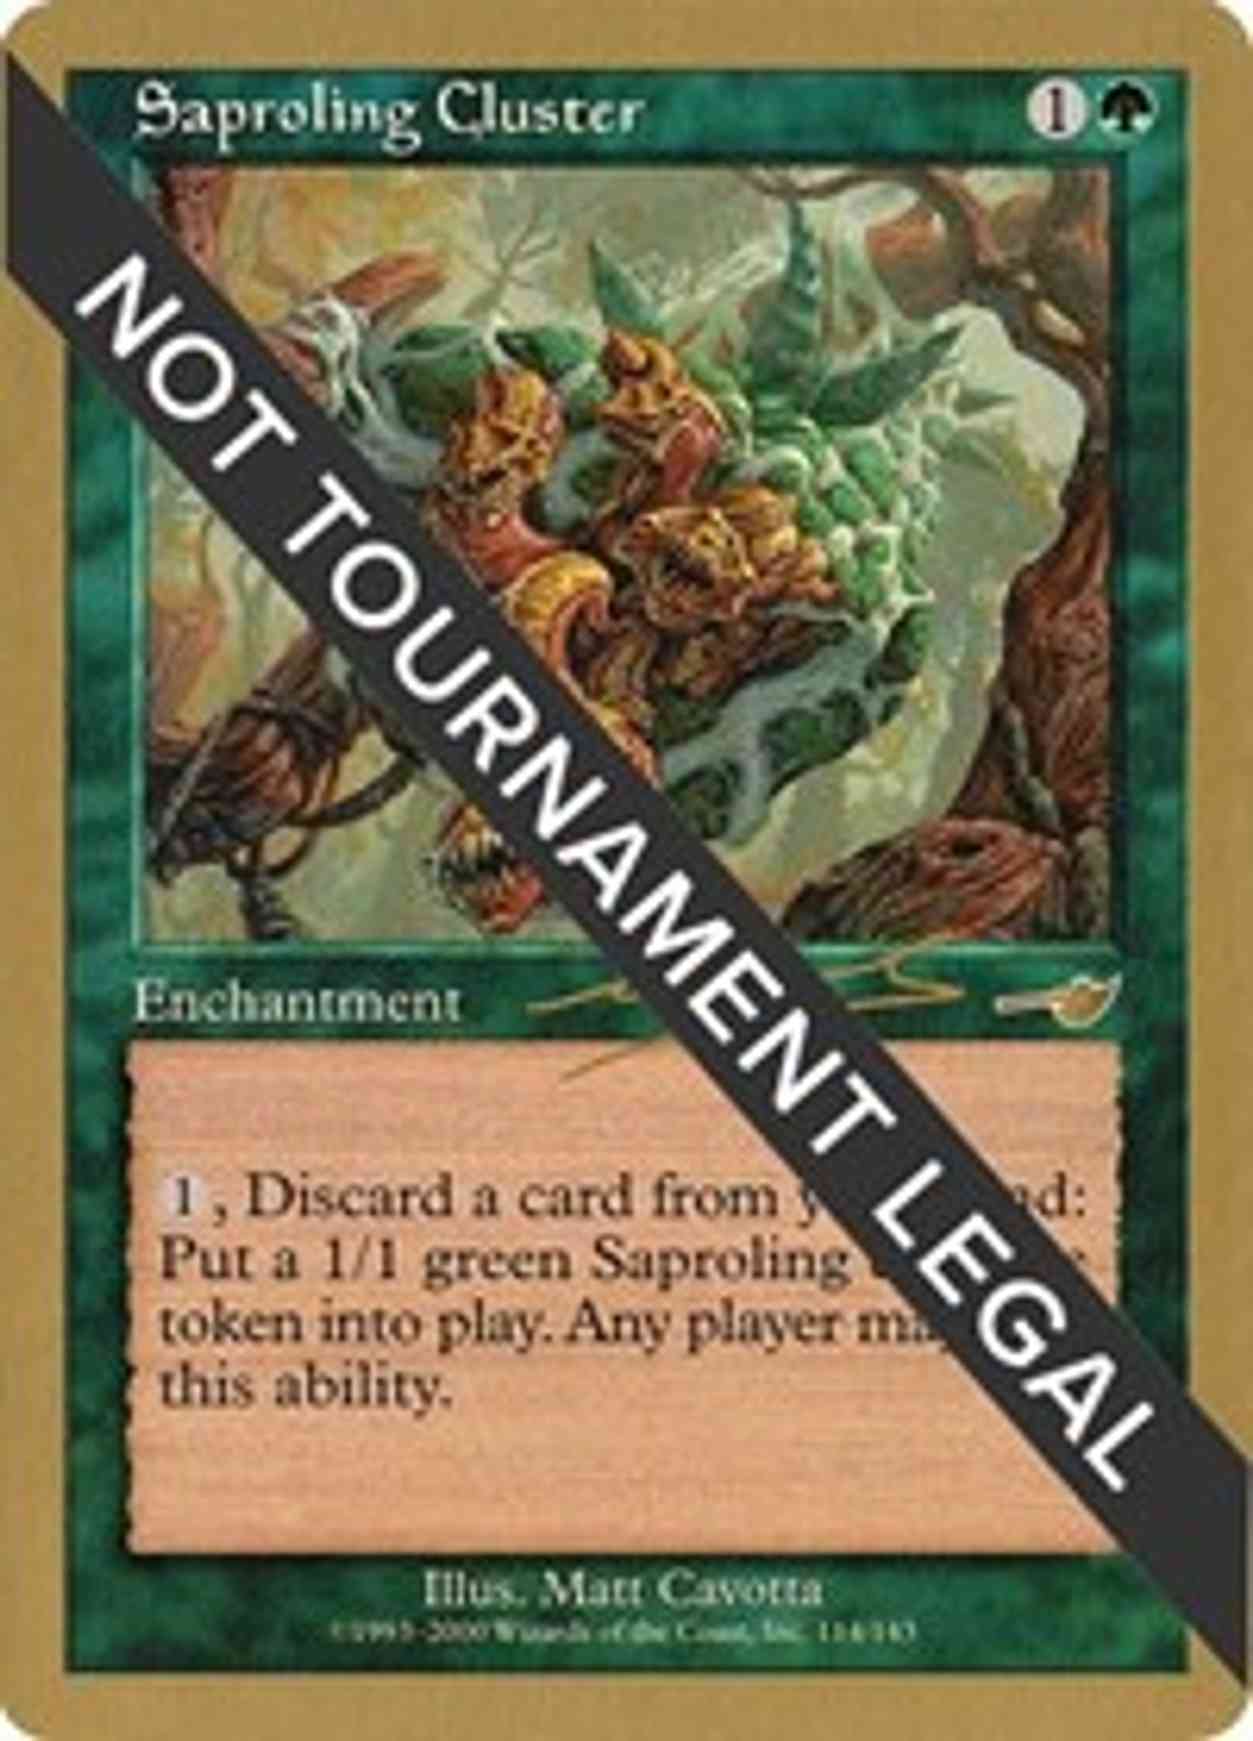 Saproling Cluster - 2000 Nicolas Labarre (NMS) magic card front